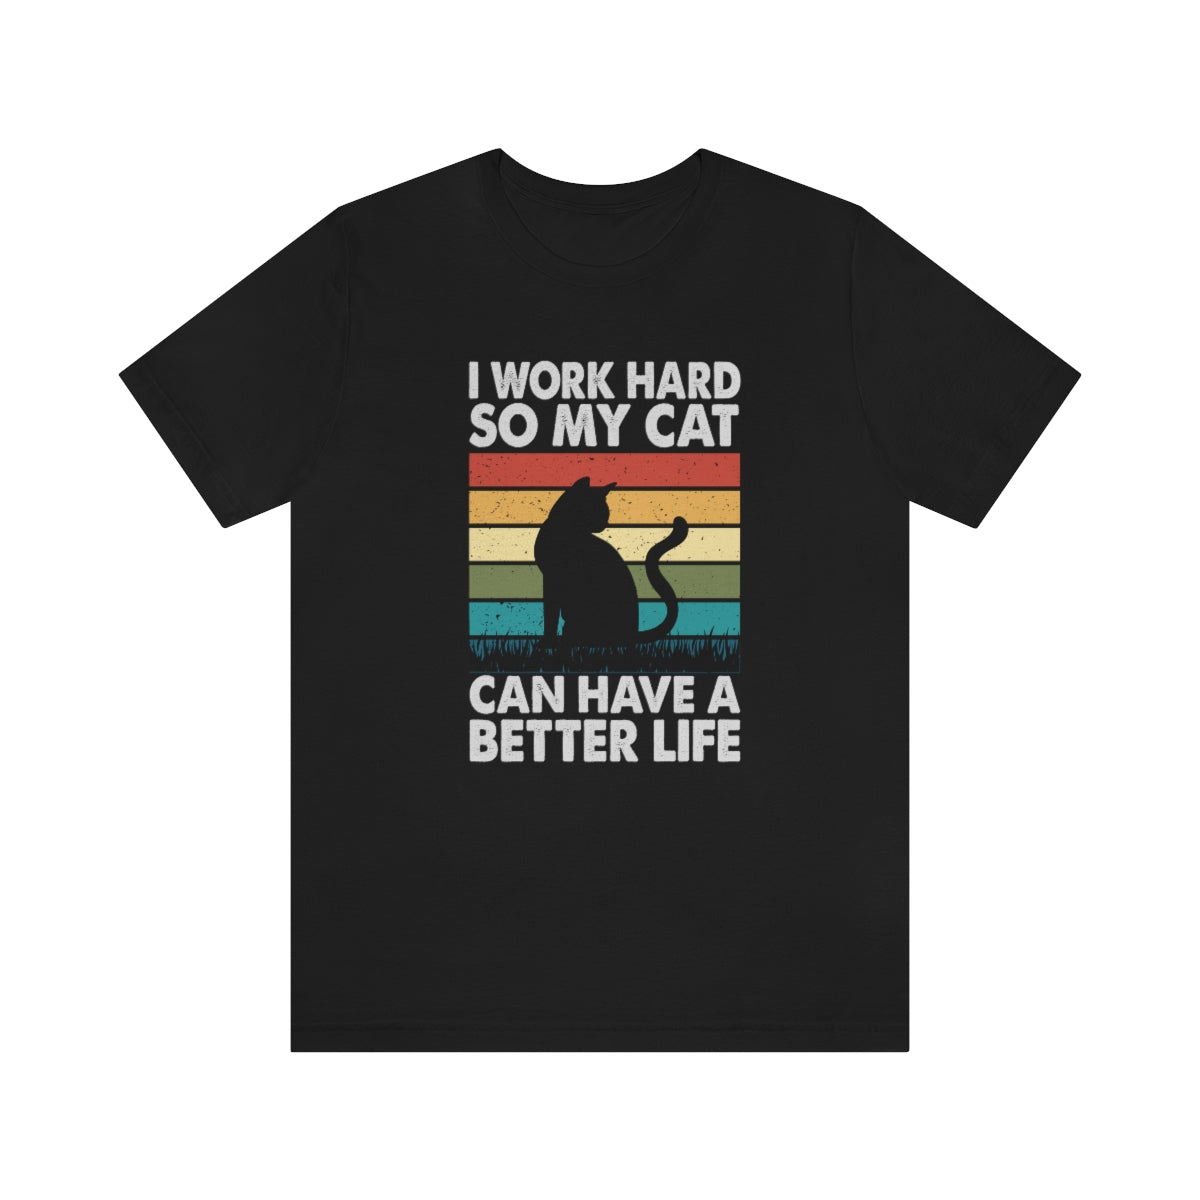 I WORK HARD SO MY CAT CAN HAVE A BETTER LIFE - T-shirt